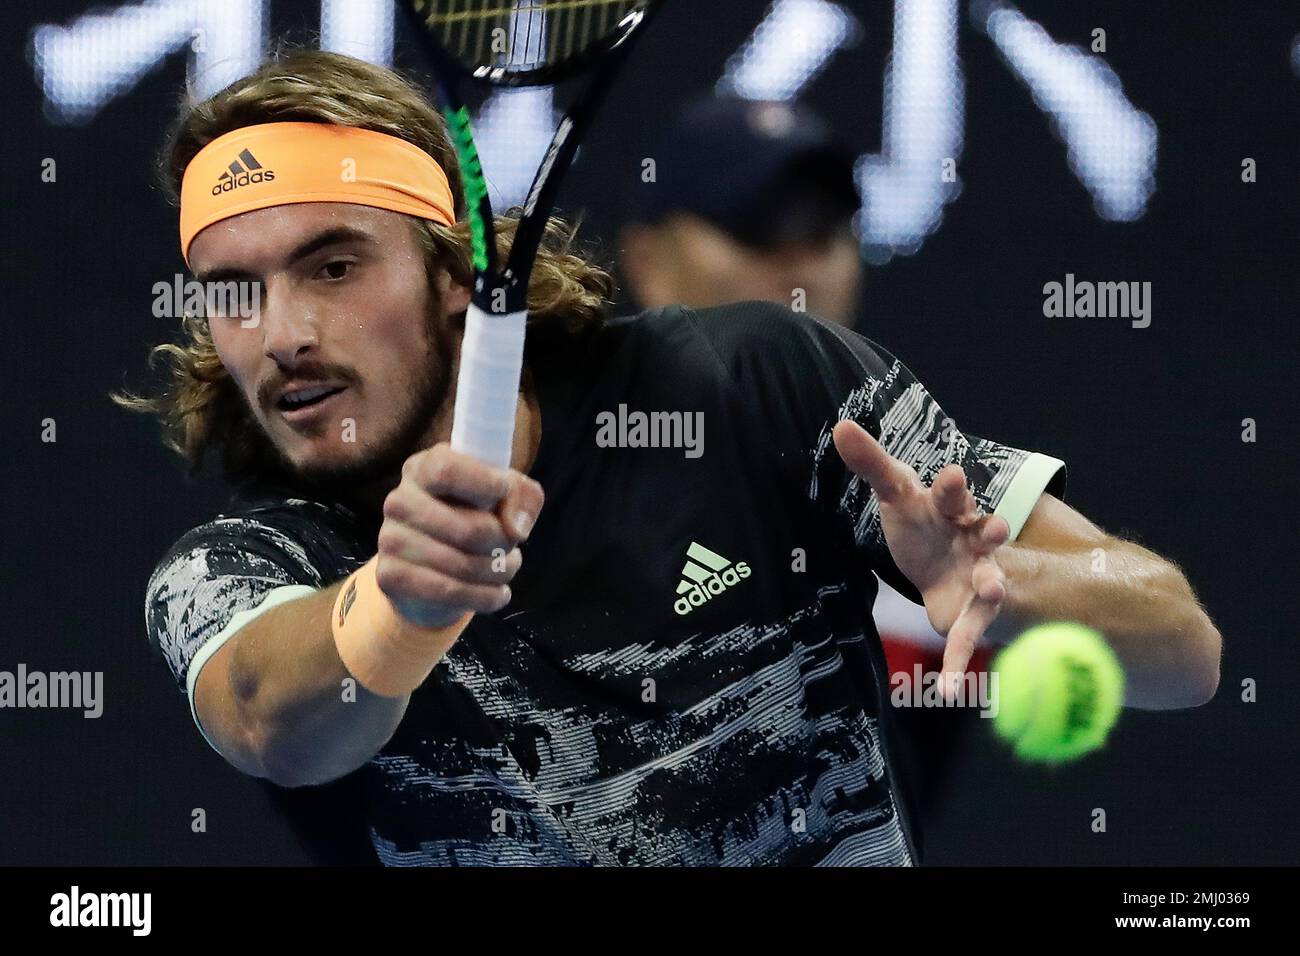 Stefanos Tsitsipas of Greece hits a return shot against Alexander Zverev of Germany during the mens semifinals match in the China Open tennis tournament in Beijing, Saturday, Oct